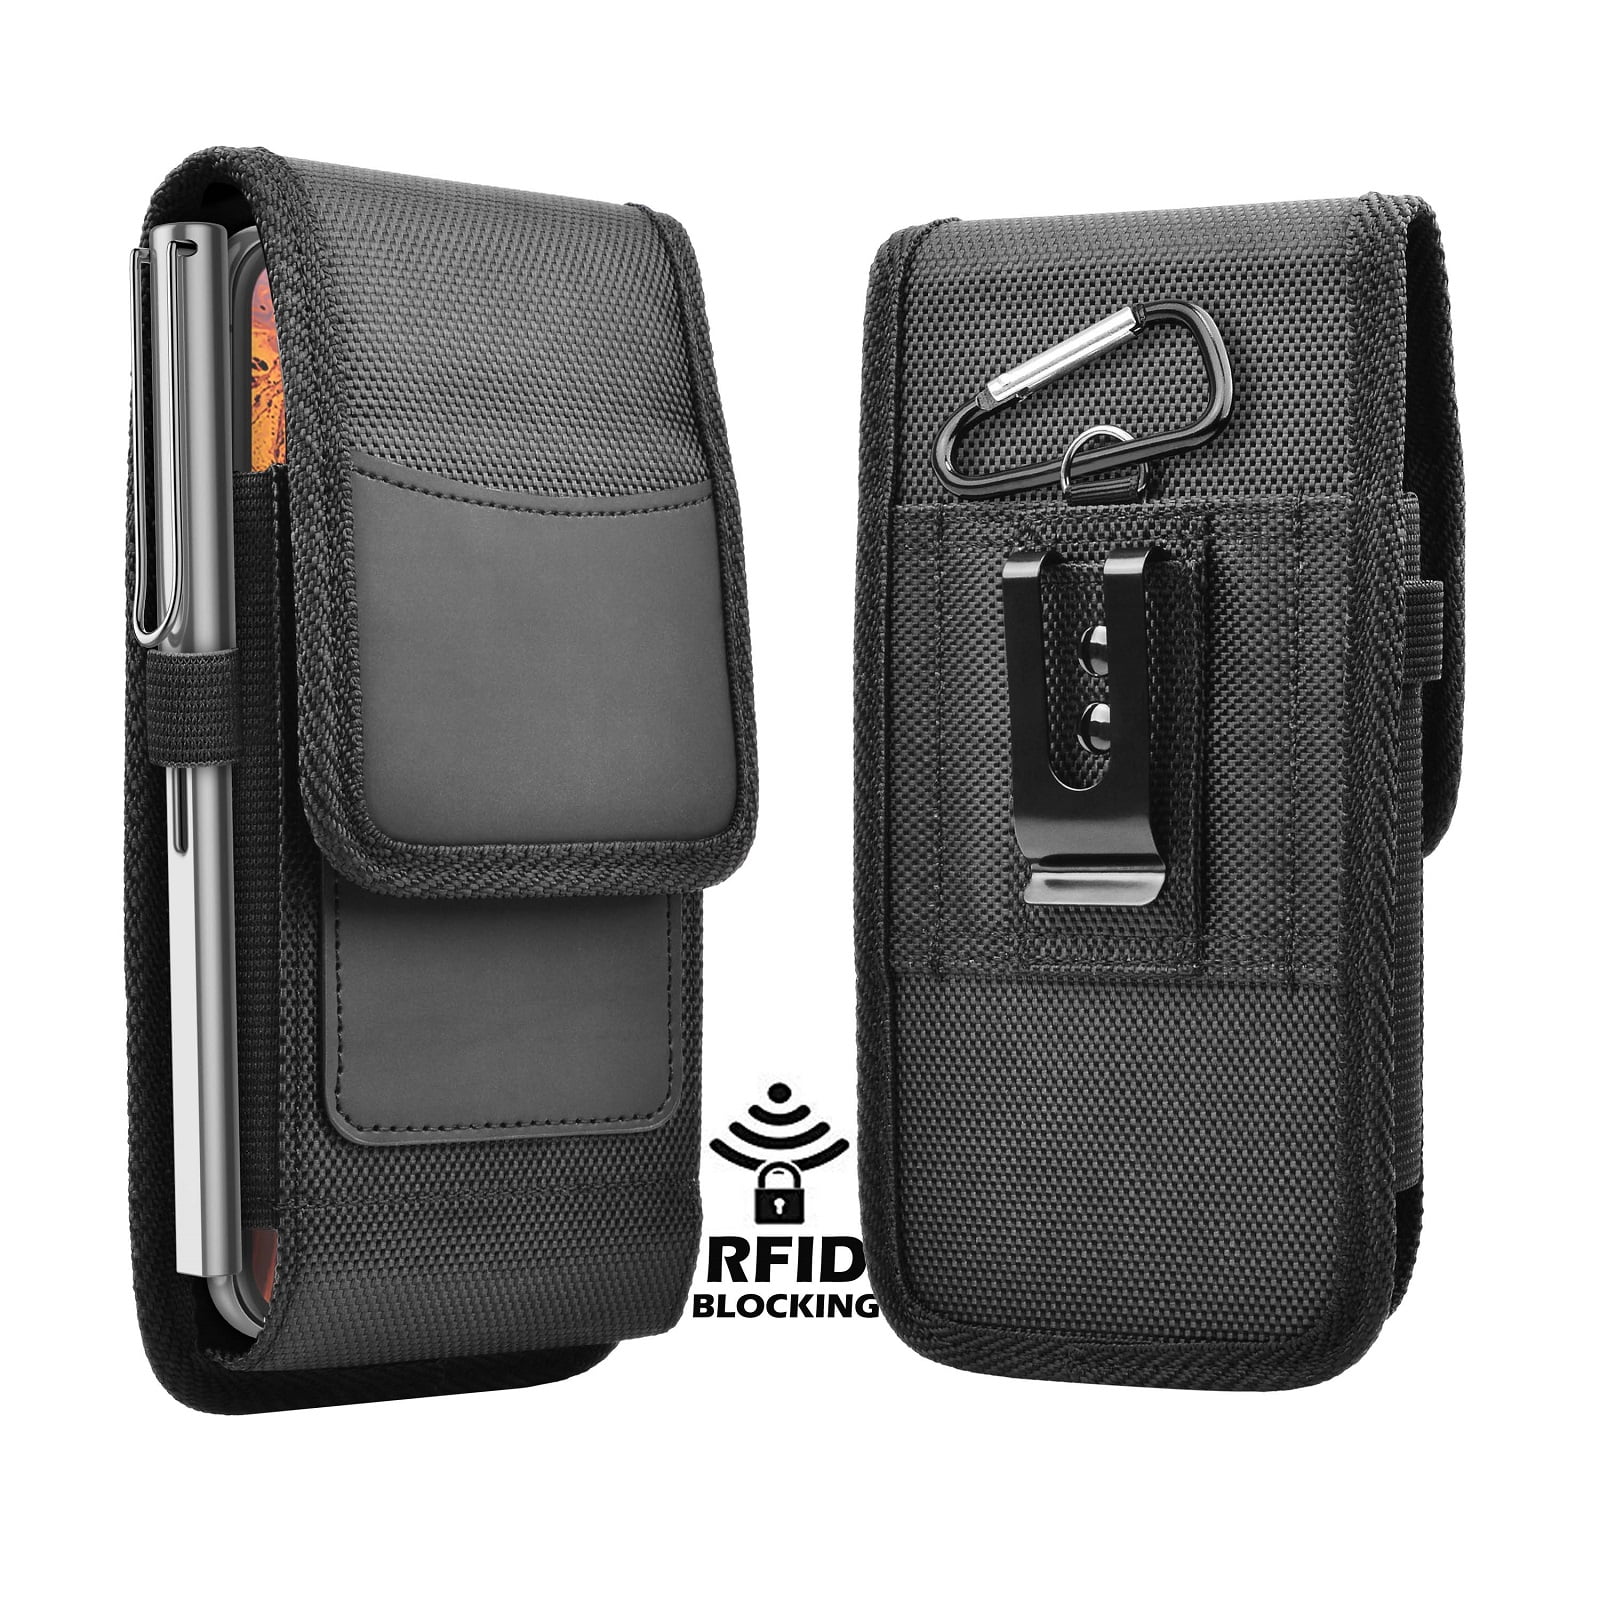 Vertical Belt Clip Holster Case PU Leather Cell Phone Holder Pouch Fit for iPhone 11 Pro Max/XS Max 8 Plus Huawei P30 Pro Honor 8X Moto G7 Power G8 Play G6 Plus One Vision Z4 Z3 Z2 Razer Phone 2 